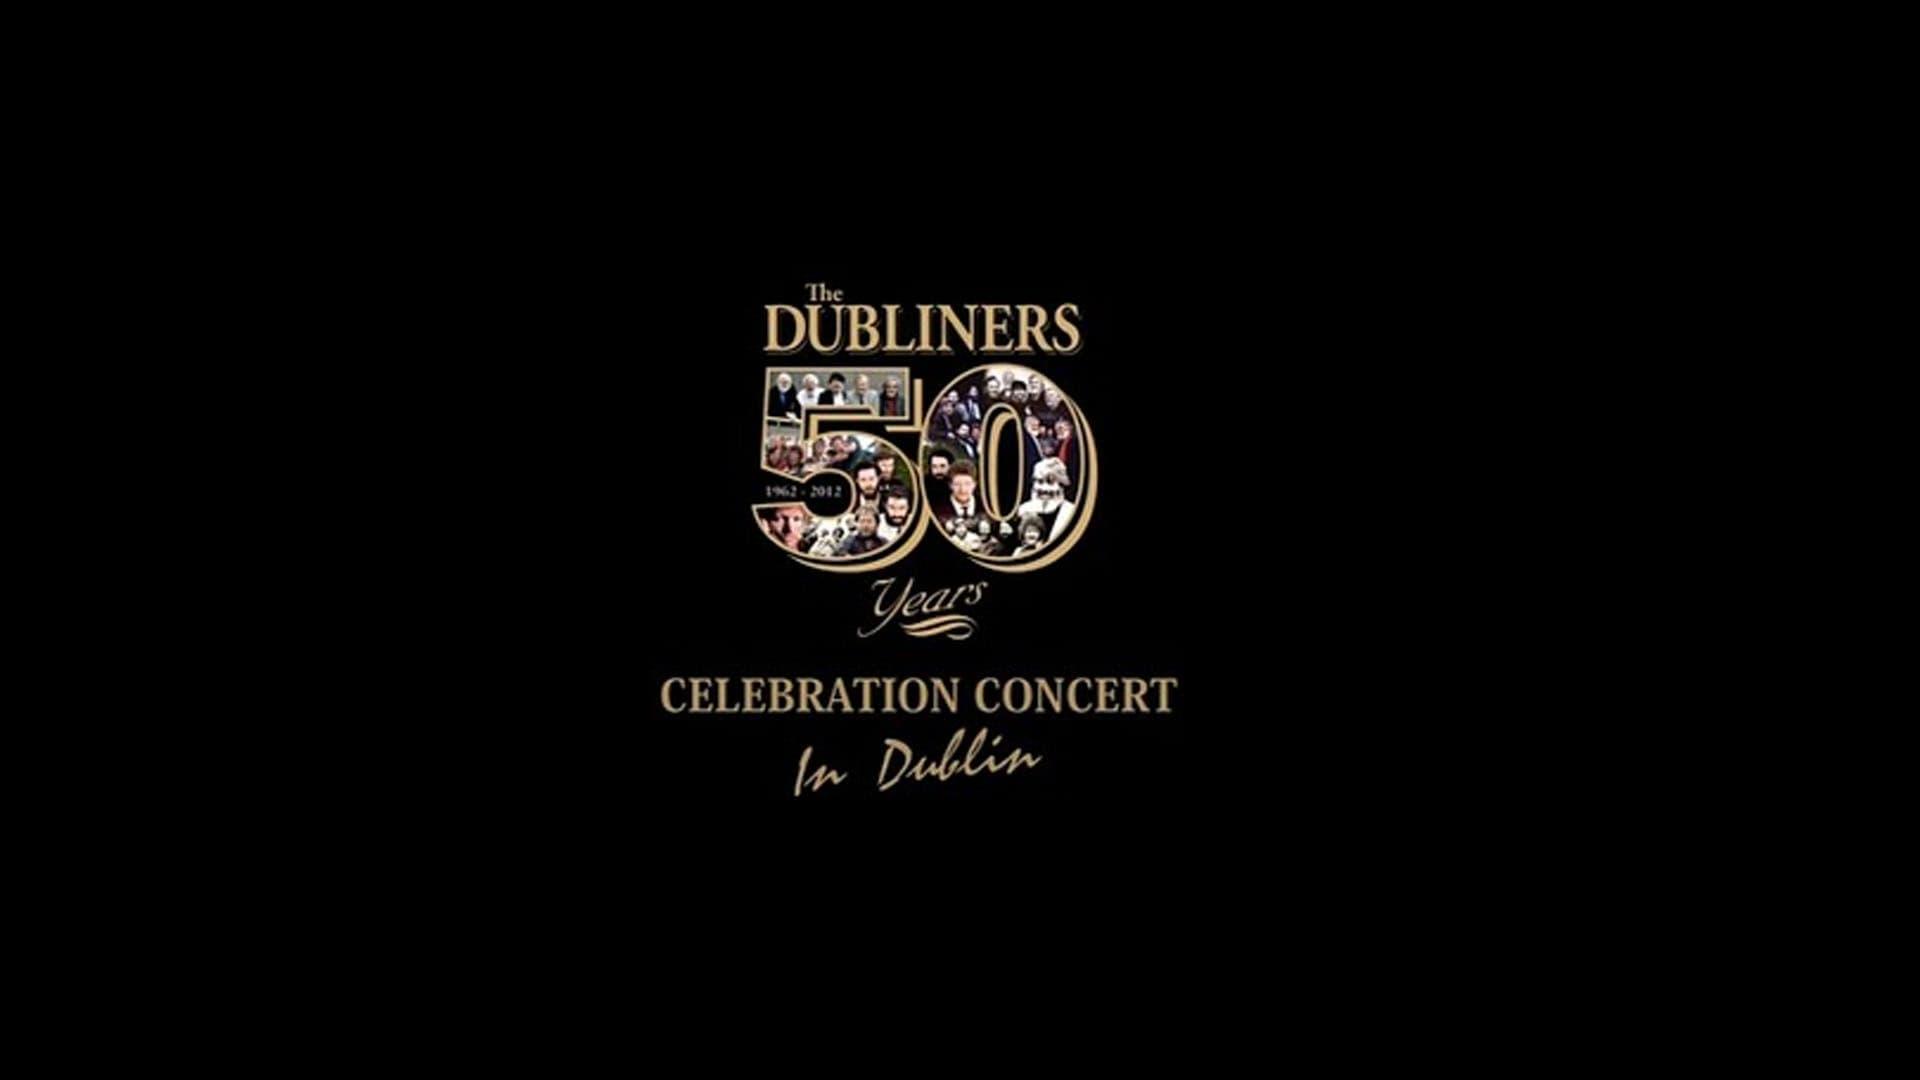 The Dubliners: 50 Years Celebration Concert in Dublin backdrop